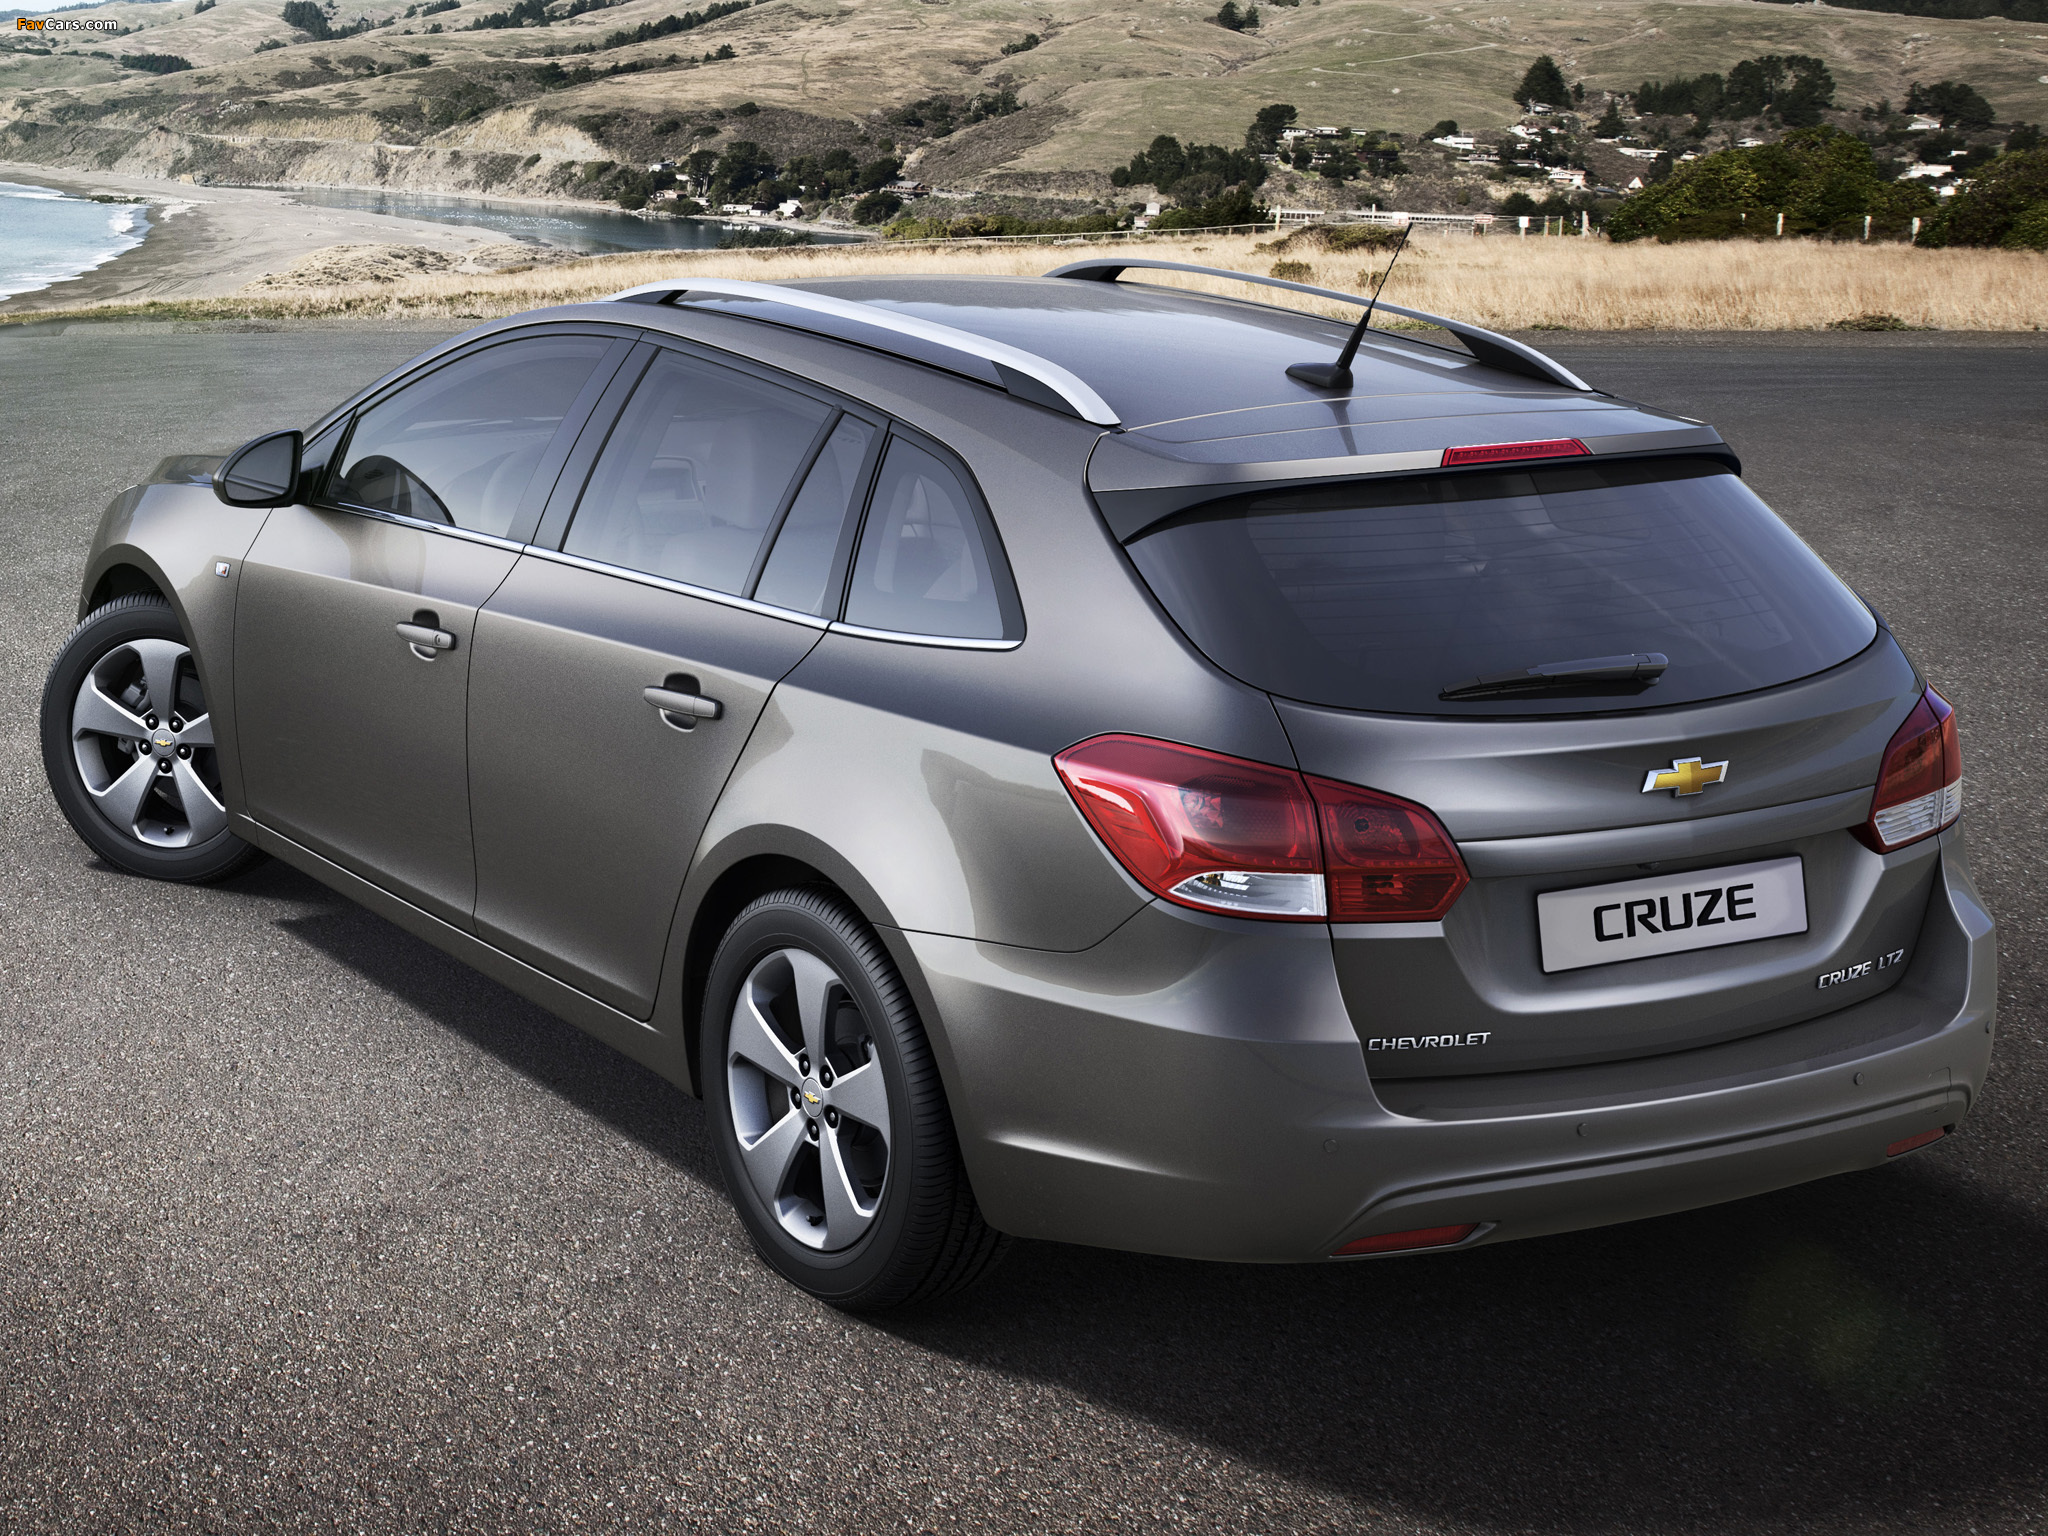 Chevrolet Cruze Station Wagon (J300) 2012 pictures (2048 x 1536)